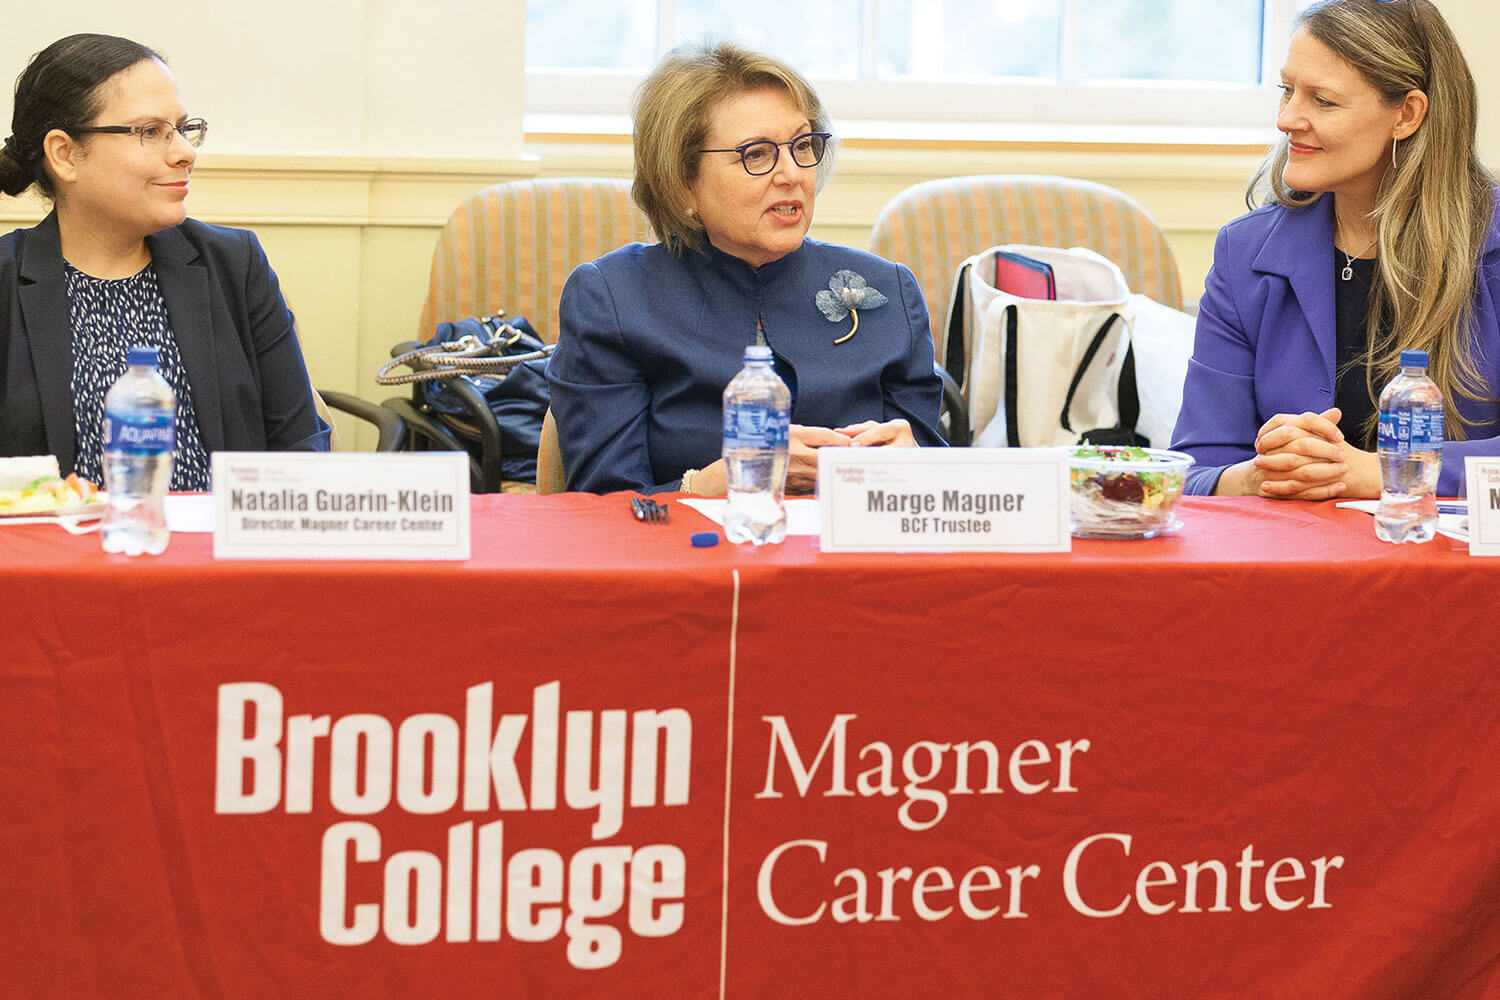 Marge Magner ’69 (center) with President Michelle J. Anderson and director of the Magner Career Center, Natalia Guarin Klein at the annual internship luncheon.